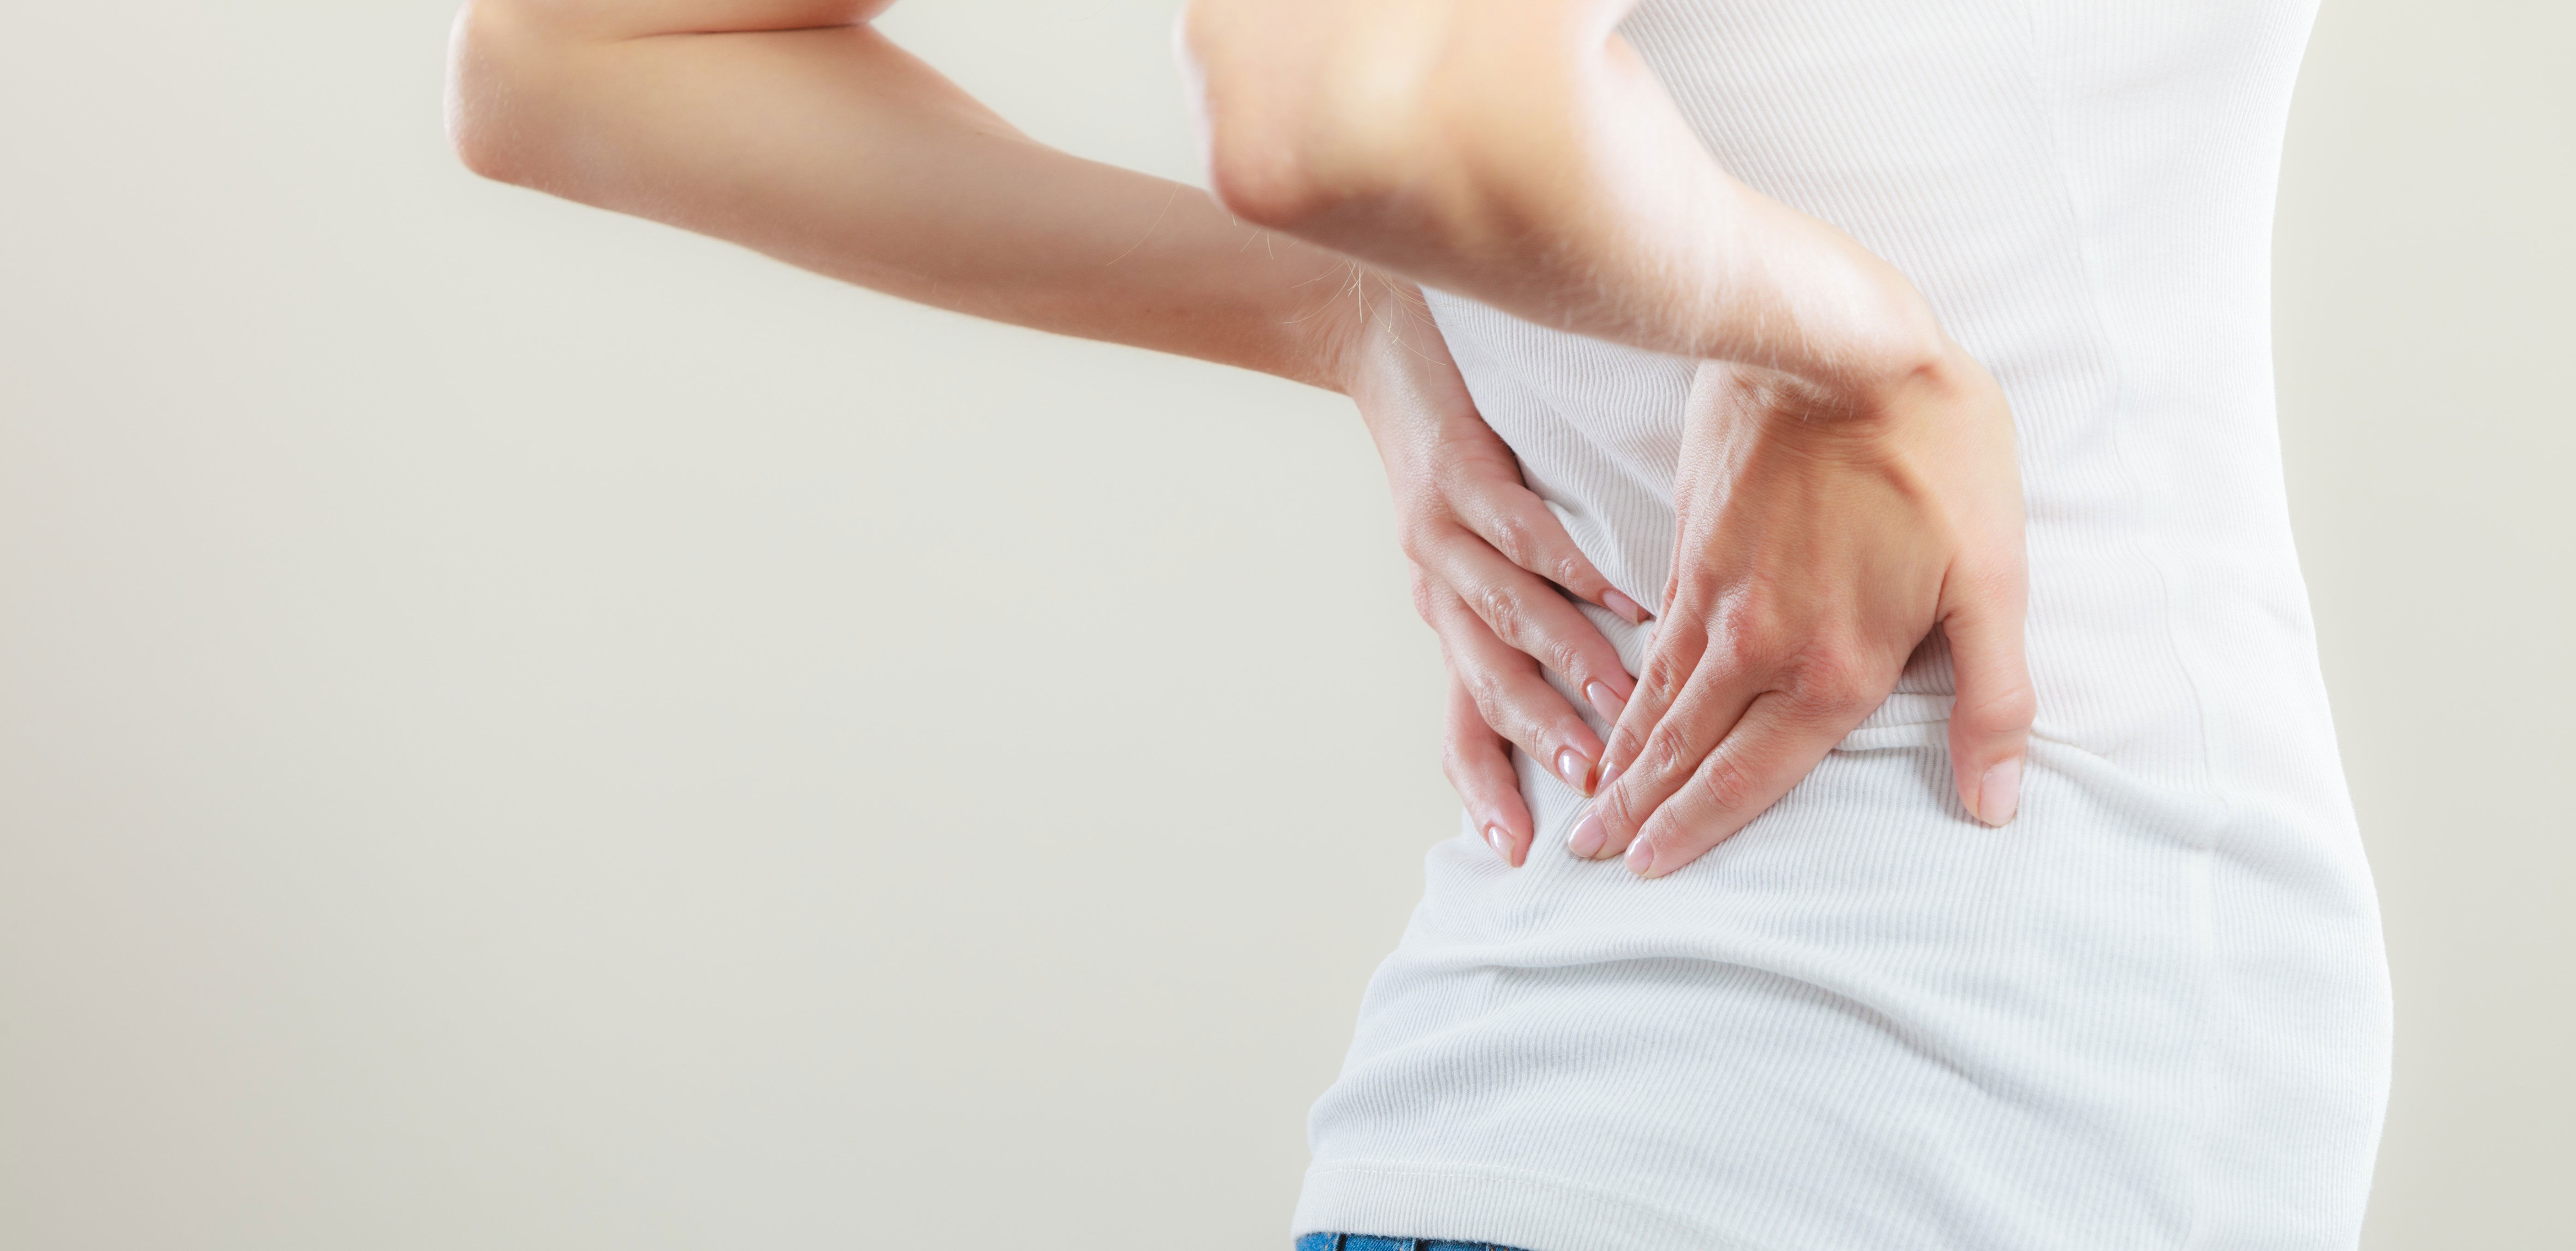 Lower Back Pain Specialist Singapore